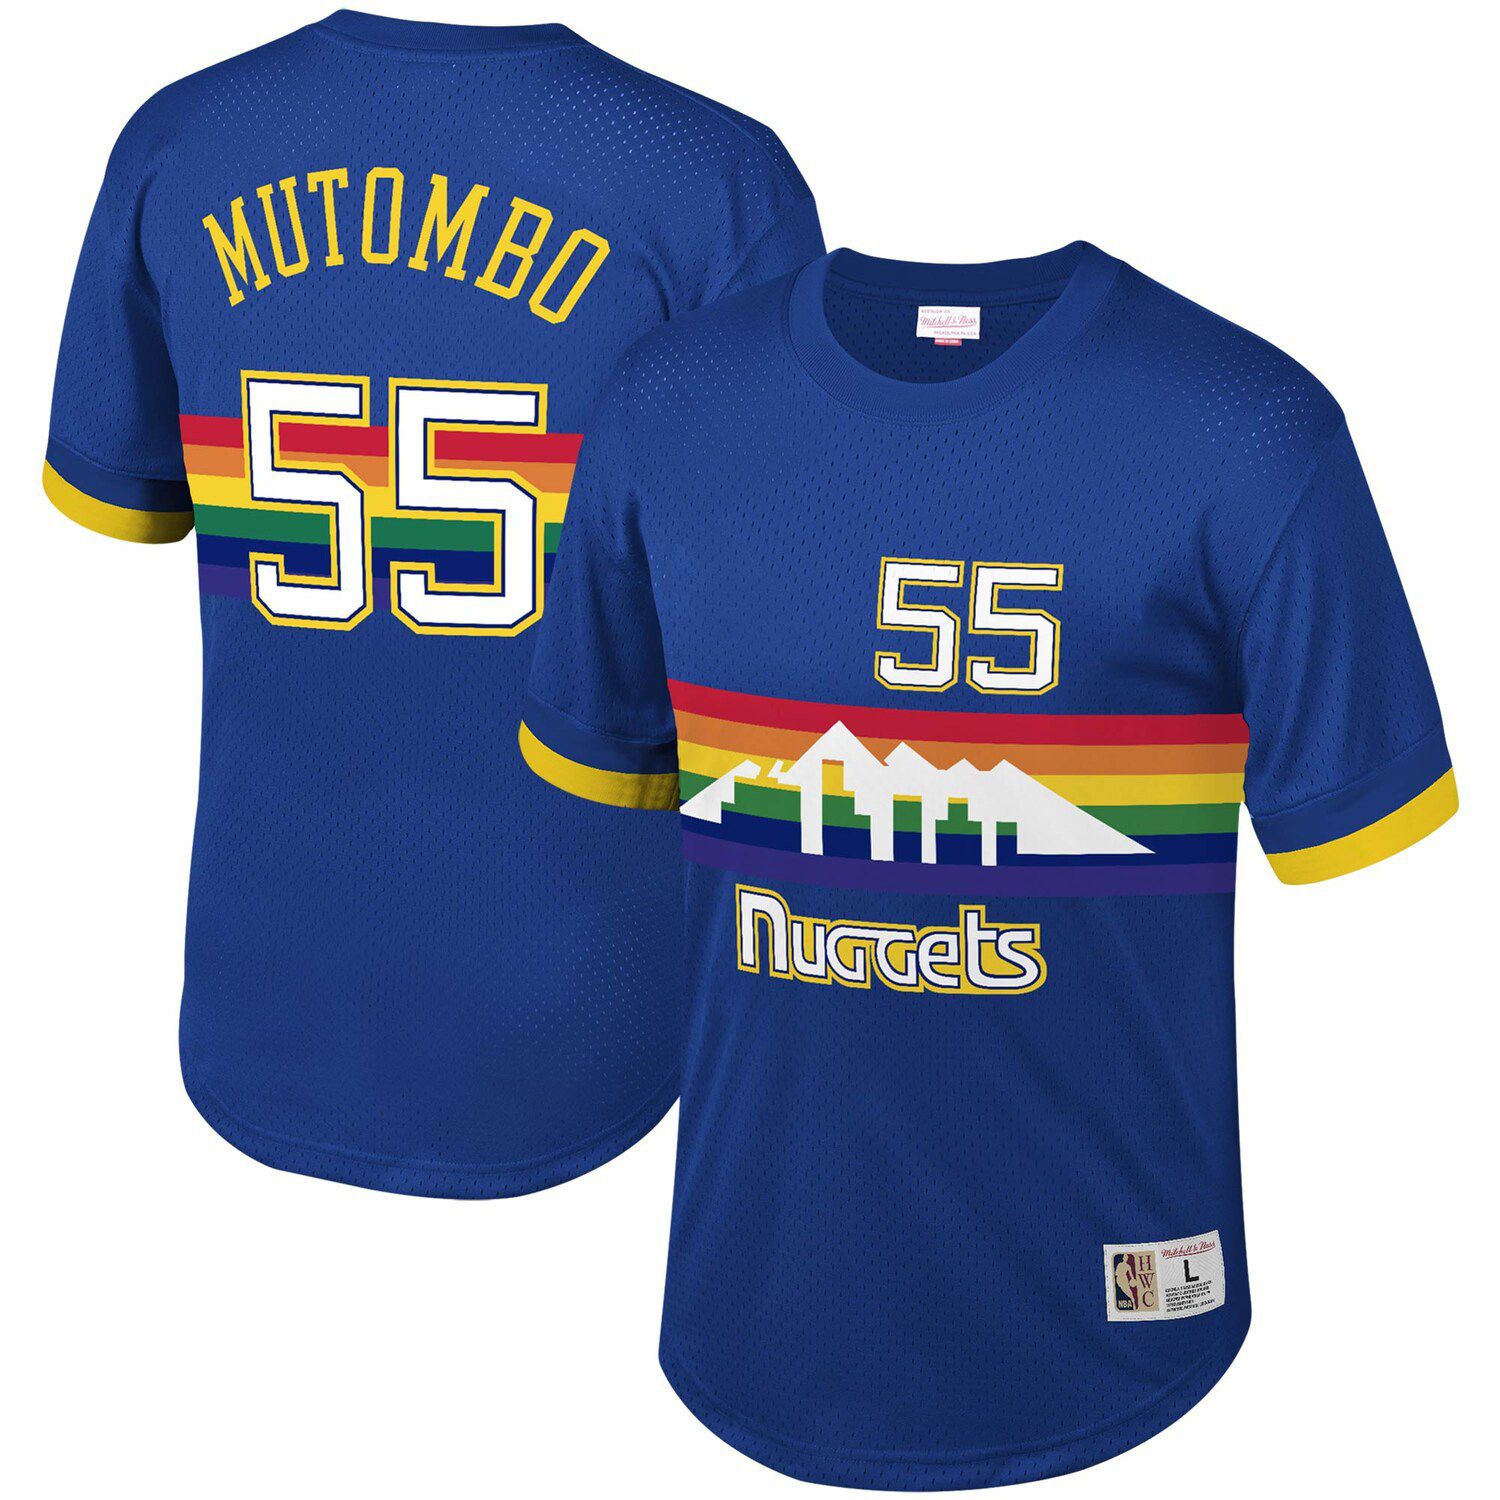 Image for Unbranded Men's Mitchell & Ness Dikembe Mutombo Royal Denver Nuggets Mesh T-Shirt at Kohl's.